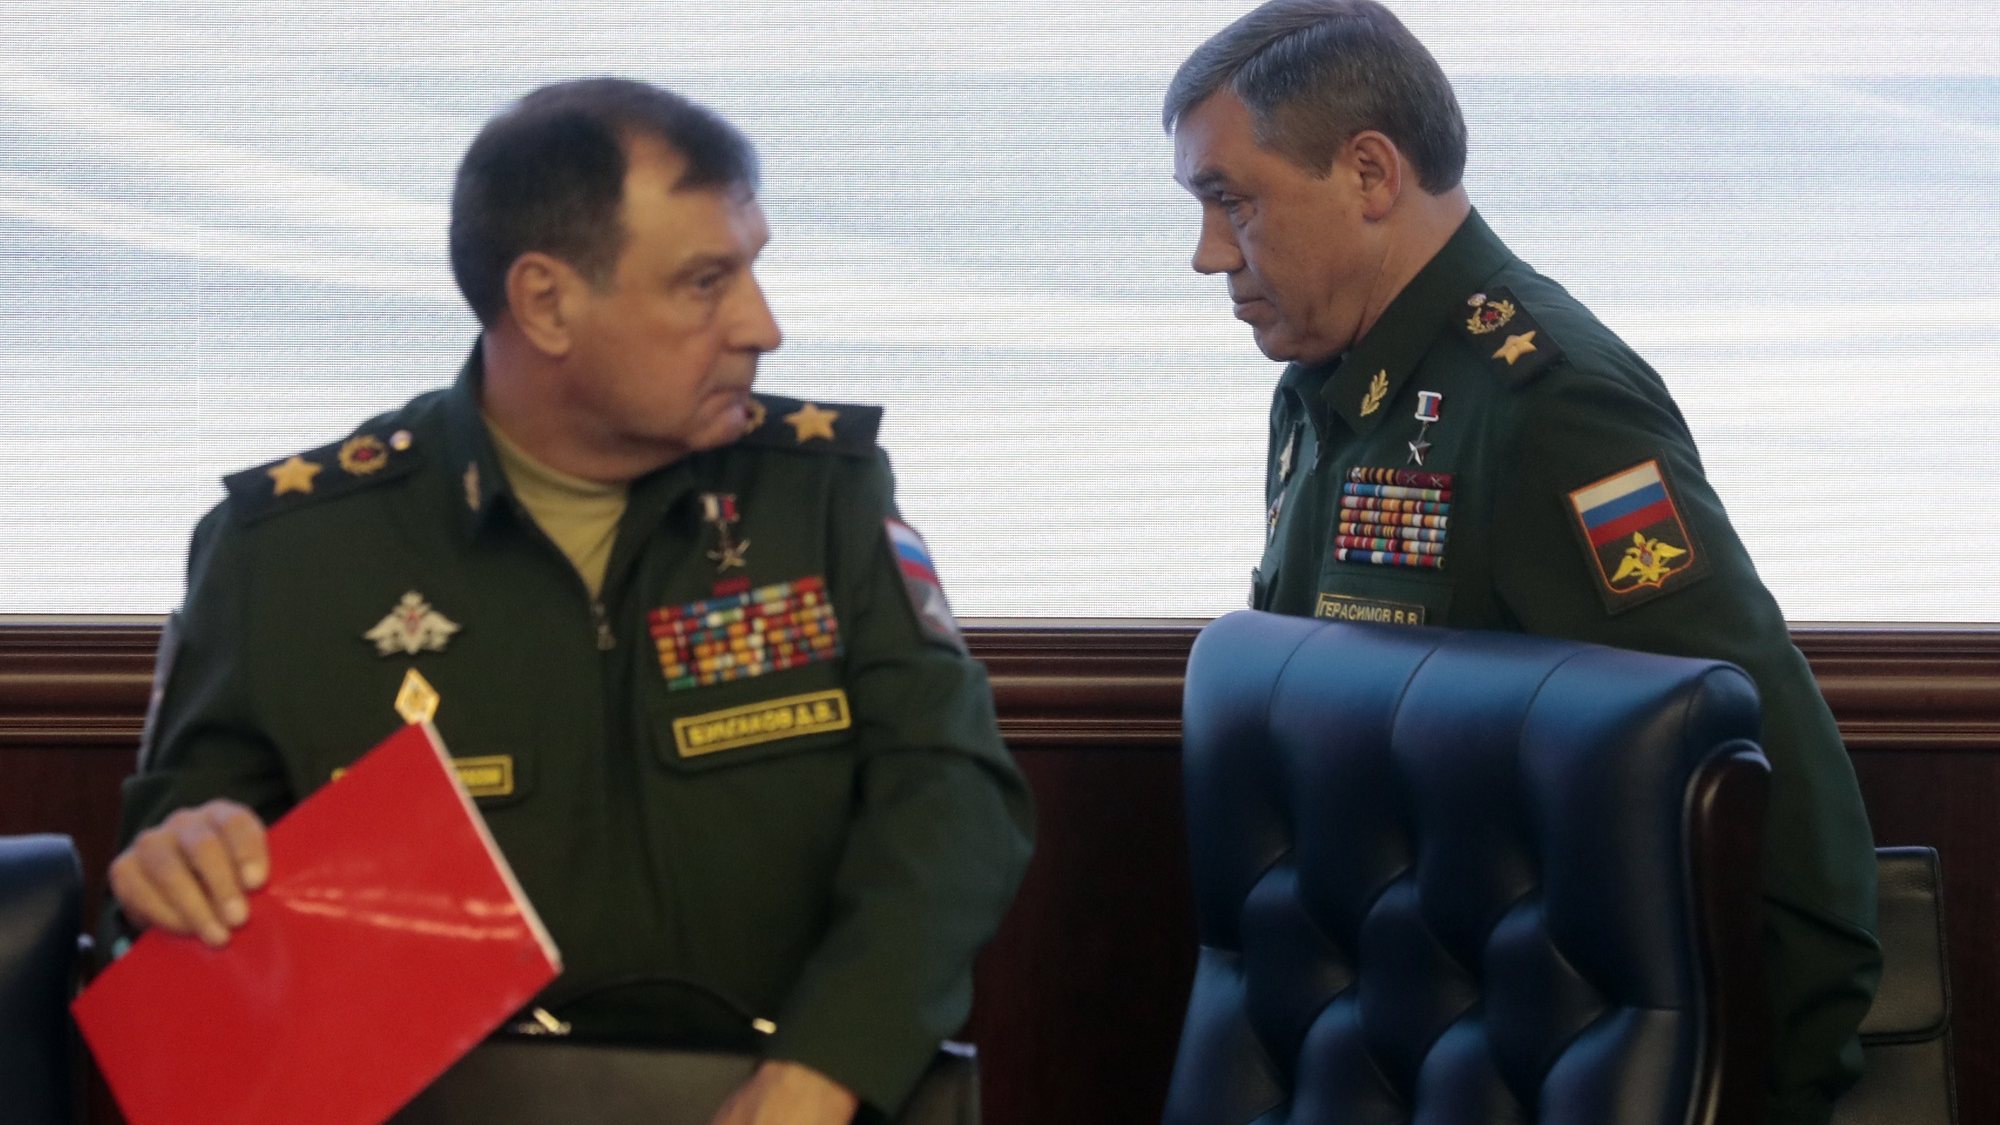 epa07000955 General of Army Valery Gerasimov (R) chief of the General Staff of Russian Army, and Deputy Defense Minister Dmitry Bulgakov (L) leave a meeting with foreign diplomats after informing them about the upcoming Russian biggest ever military maneuvers, Vostok 2018 (East 2018), during a briefing at the Defense Ministry in Moscow, Russia, 06 September 2018. Reports state that the exercises will be the biggest since 1981 military exercises, and will involve forces of two military districts (central and far east) including 297,000 military servicemen, more than 1000 different military aircrafts, up to 36,000 tanks, APCes, and other vehicles, plus 80 warships. Forces from China and Mongolia will take part in the exercises. Vostok 2018 and will run from 11 to 17 September in the Russian Far East.  EPA/SERGEI CHIRIKOV